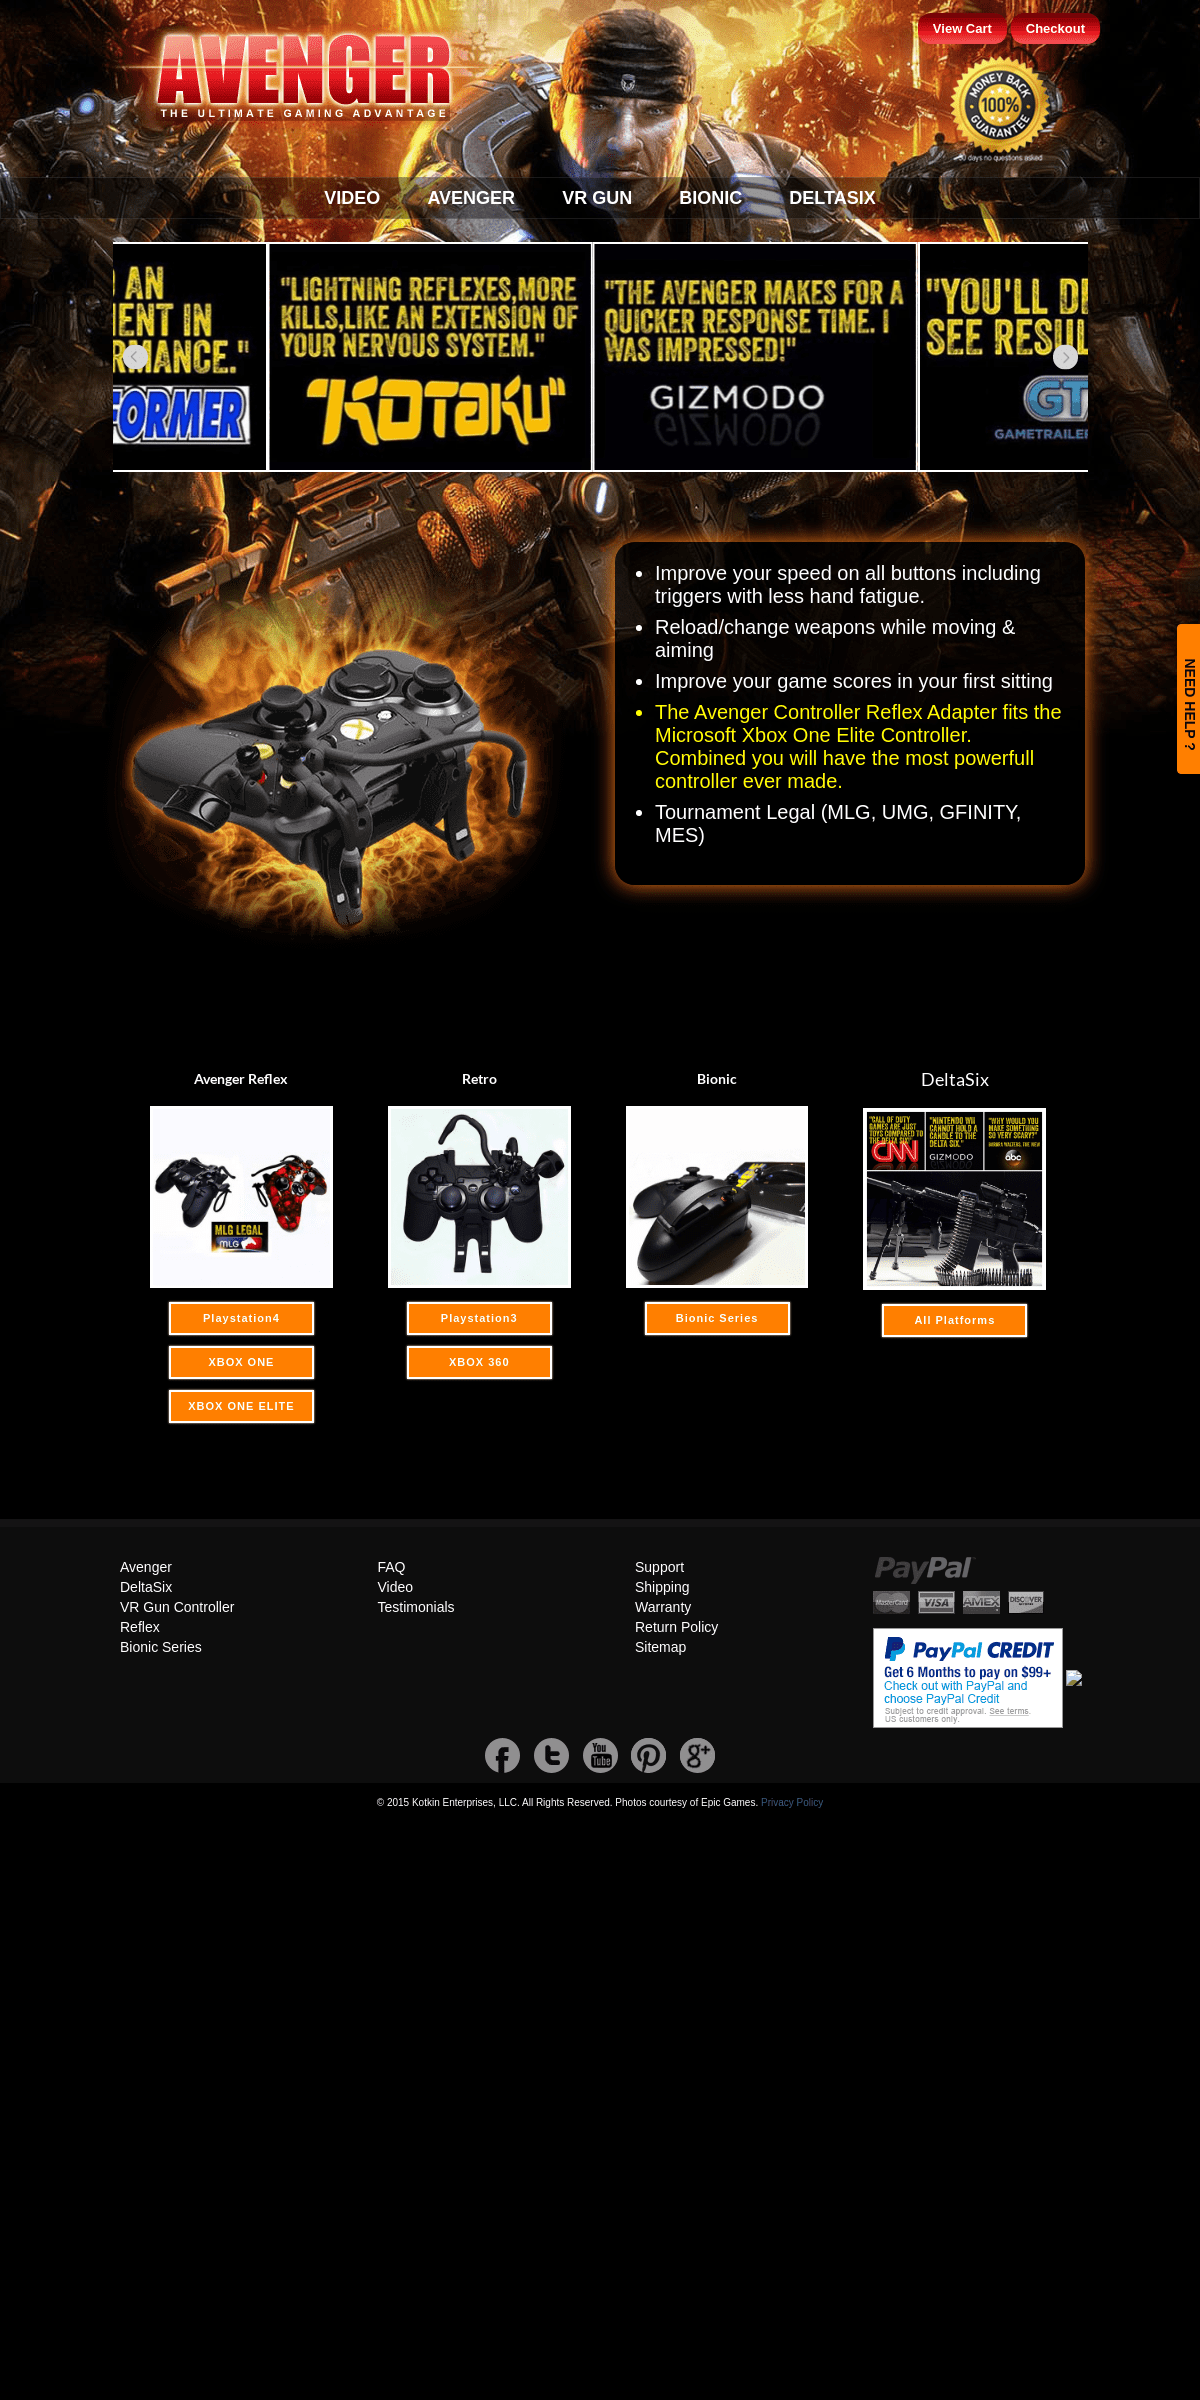 A complete backup of avengercontroller.com